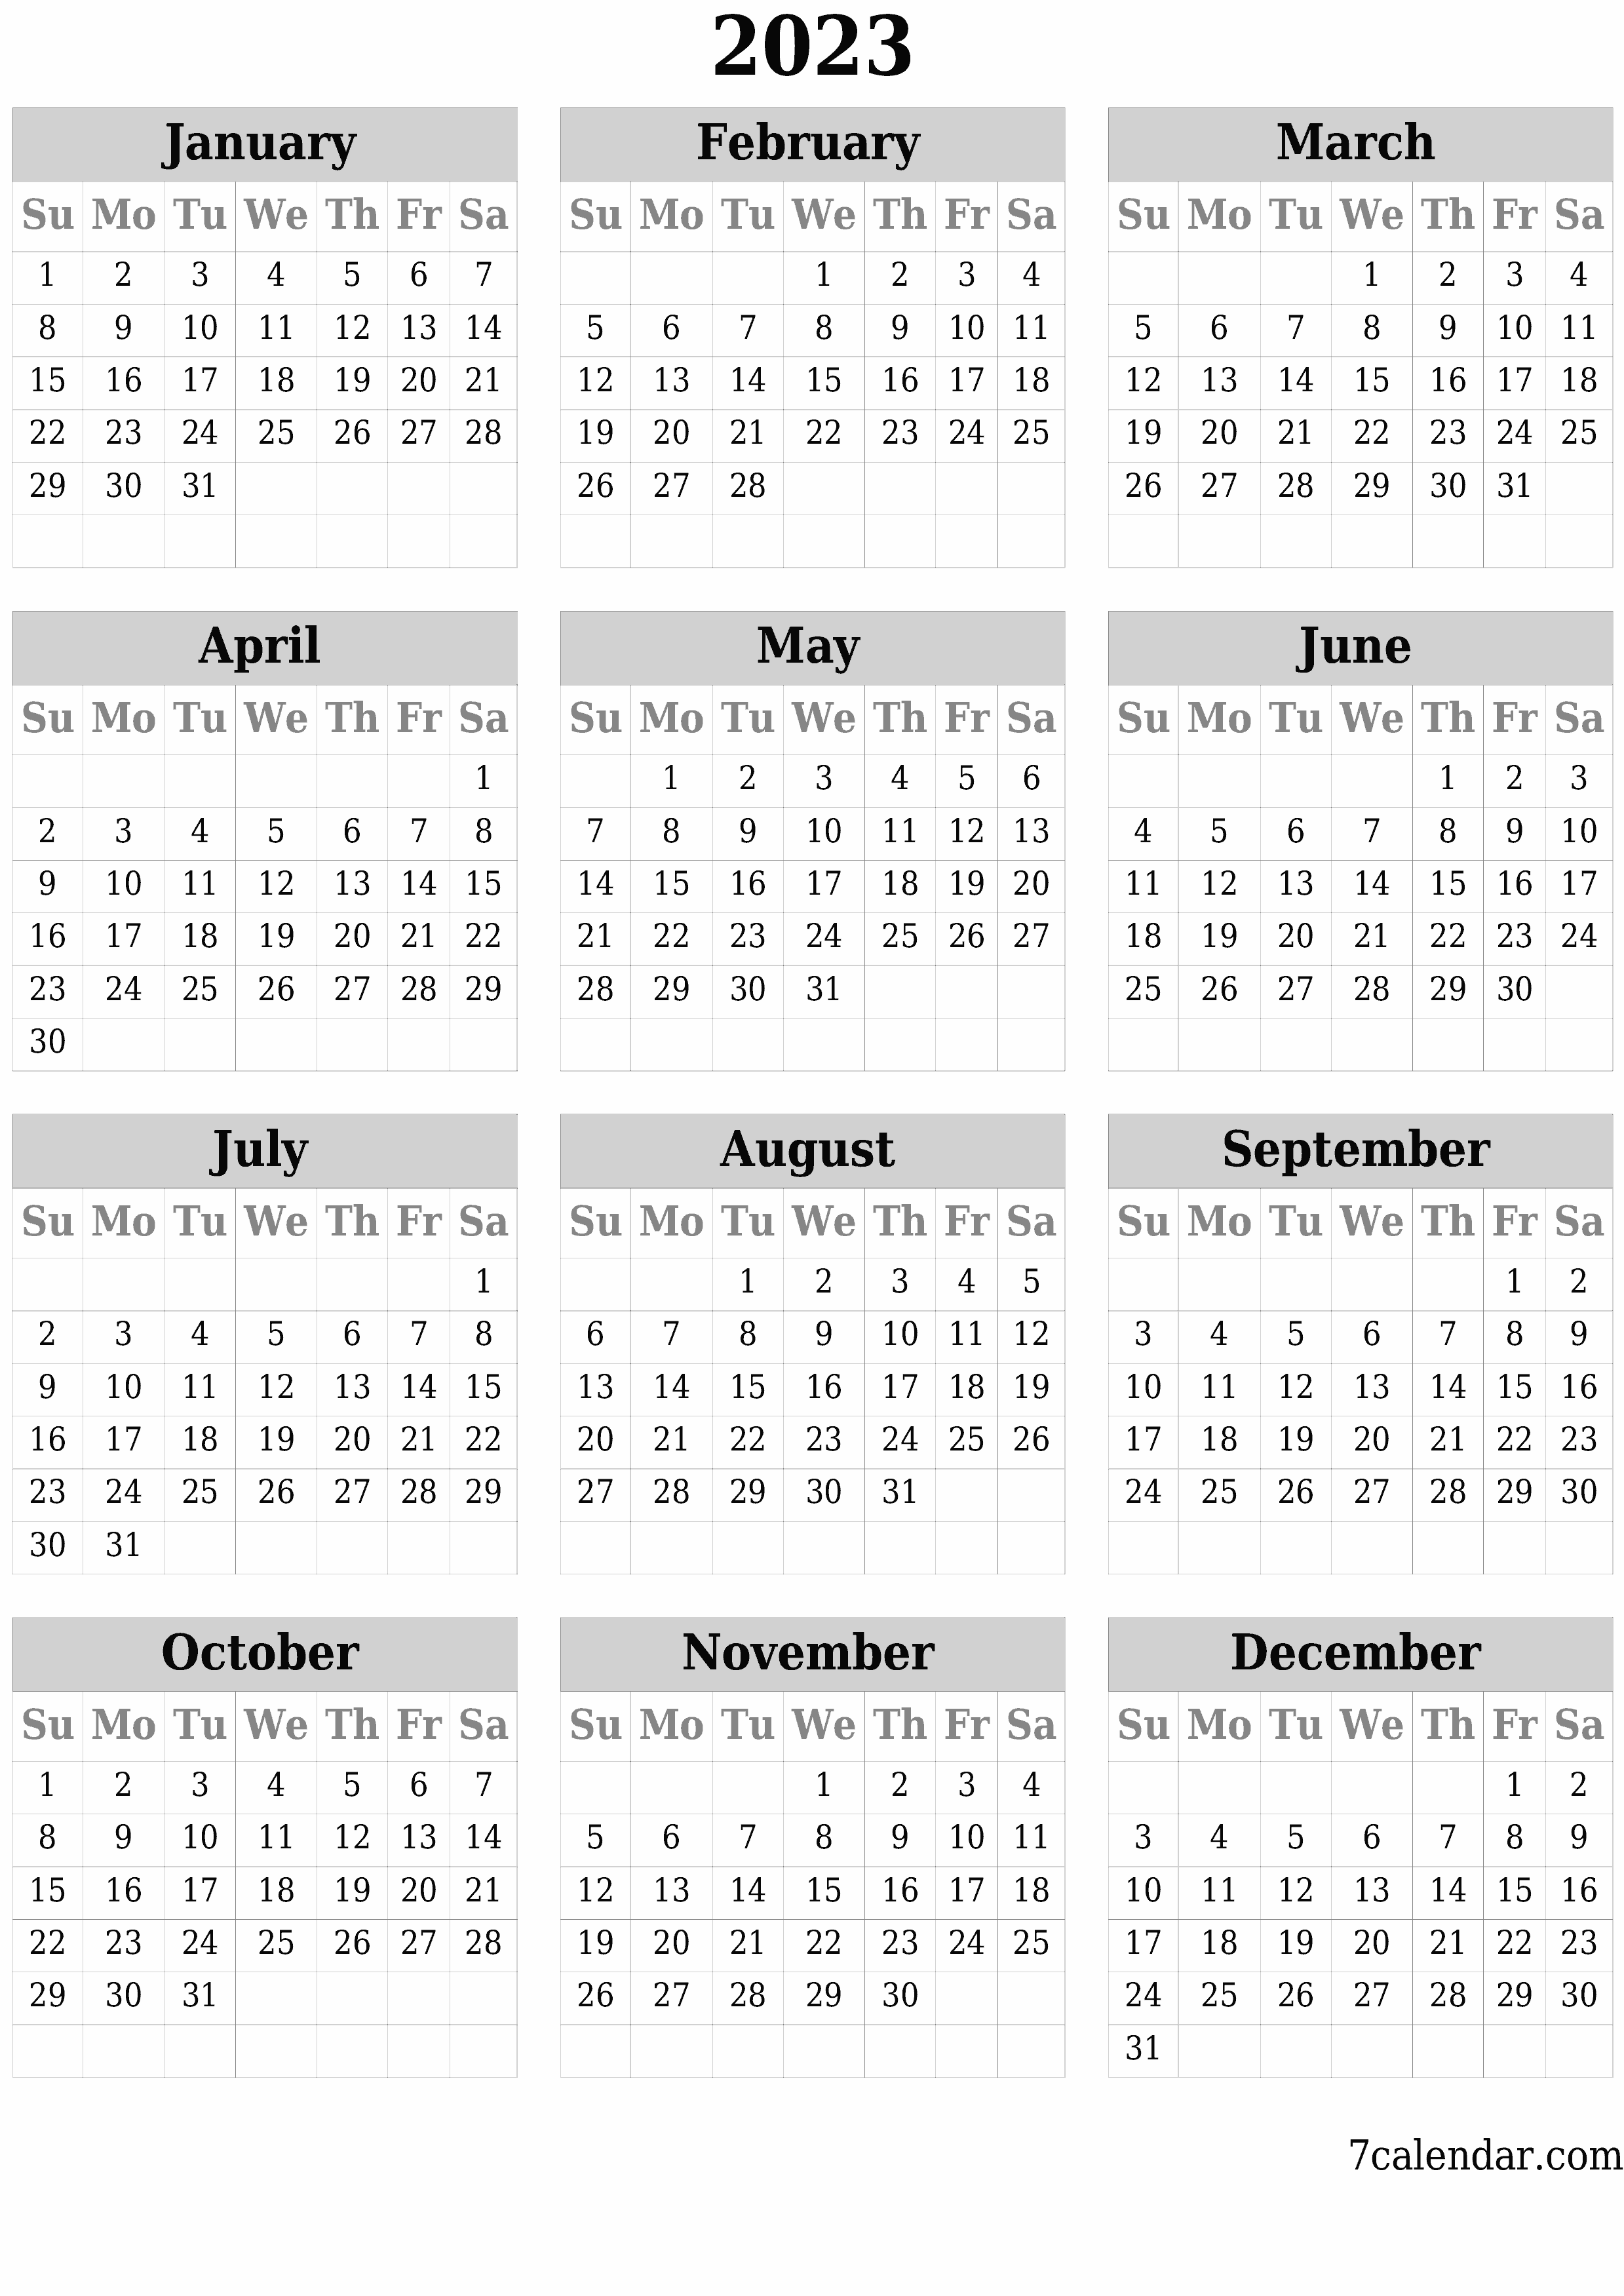 Blank yearly printable calendar and planner for the year 2023 with notes, save and print to PDF PNG English - 7calendar.com